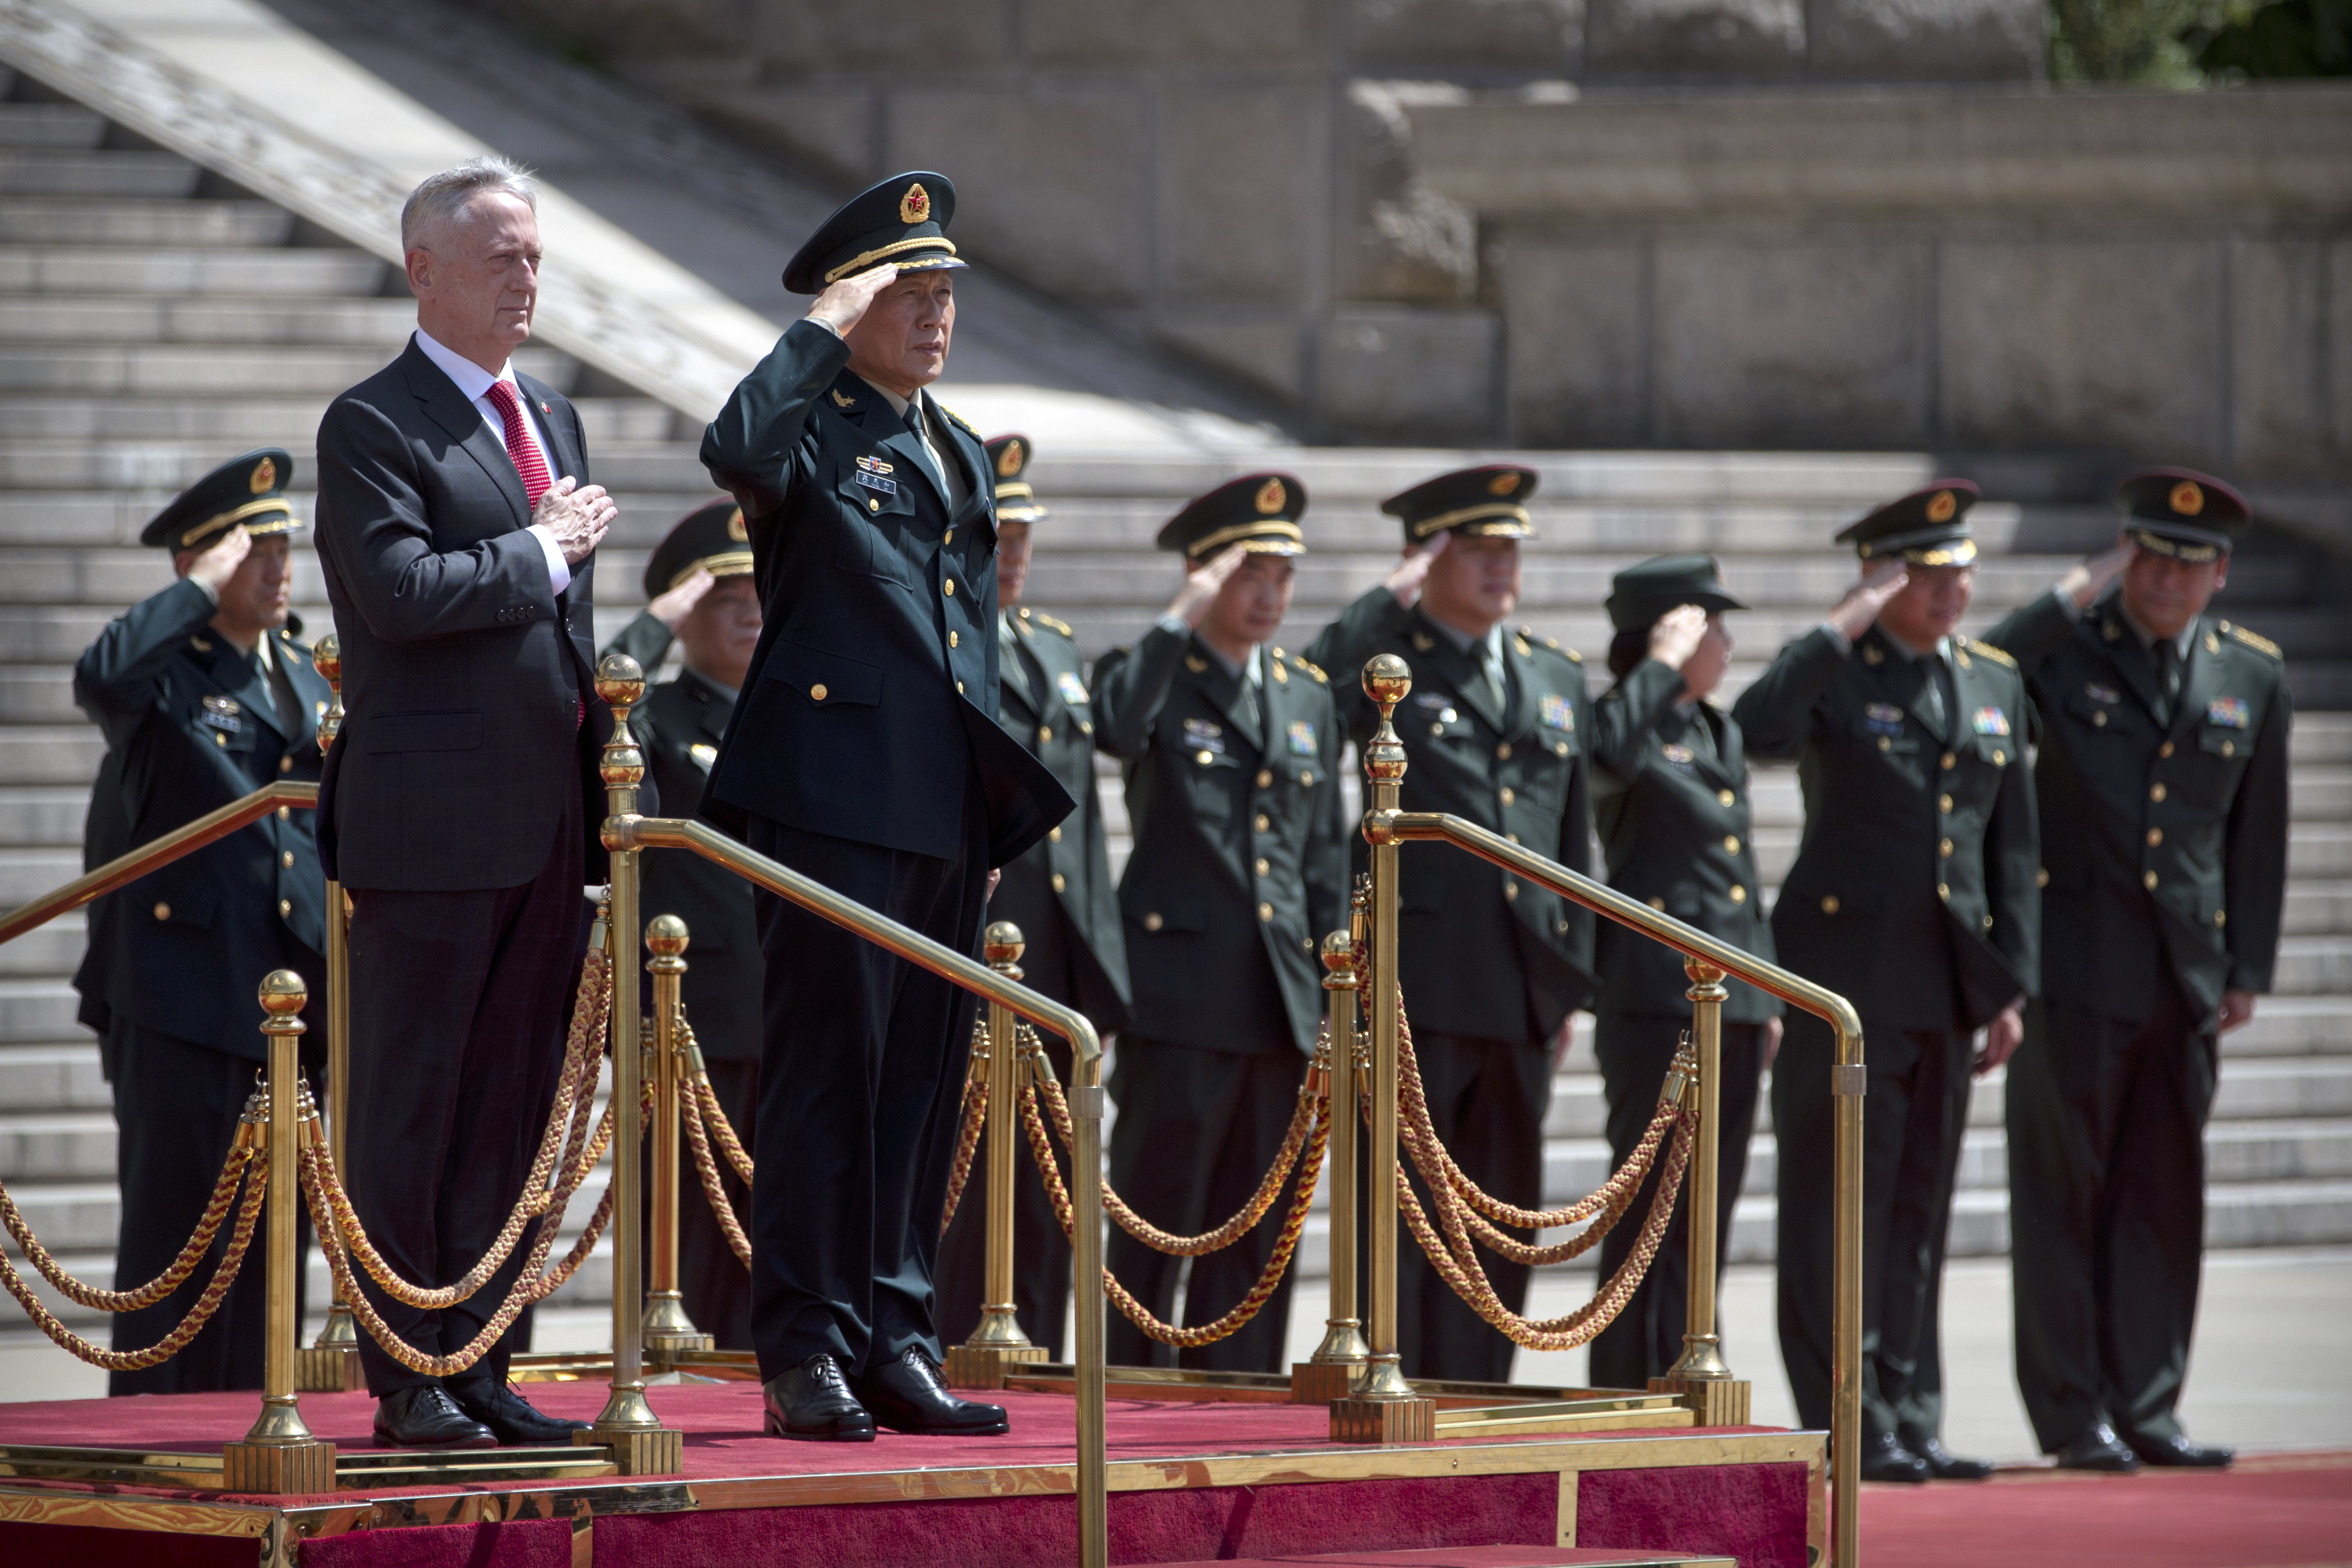 U.S. Defense Secretary Jim Mattis, front left, and China's Defense Minister Wei Fenghe stand as the American national anthem is played during a welcome ceremony at the Bayi Building in Beijing, Wednesday, June 27, 2018. (AP Photo/Mark Schiefelbein, Pool)